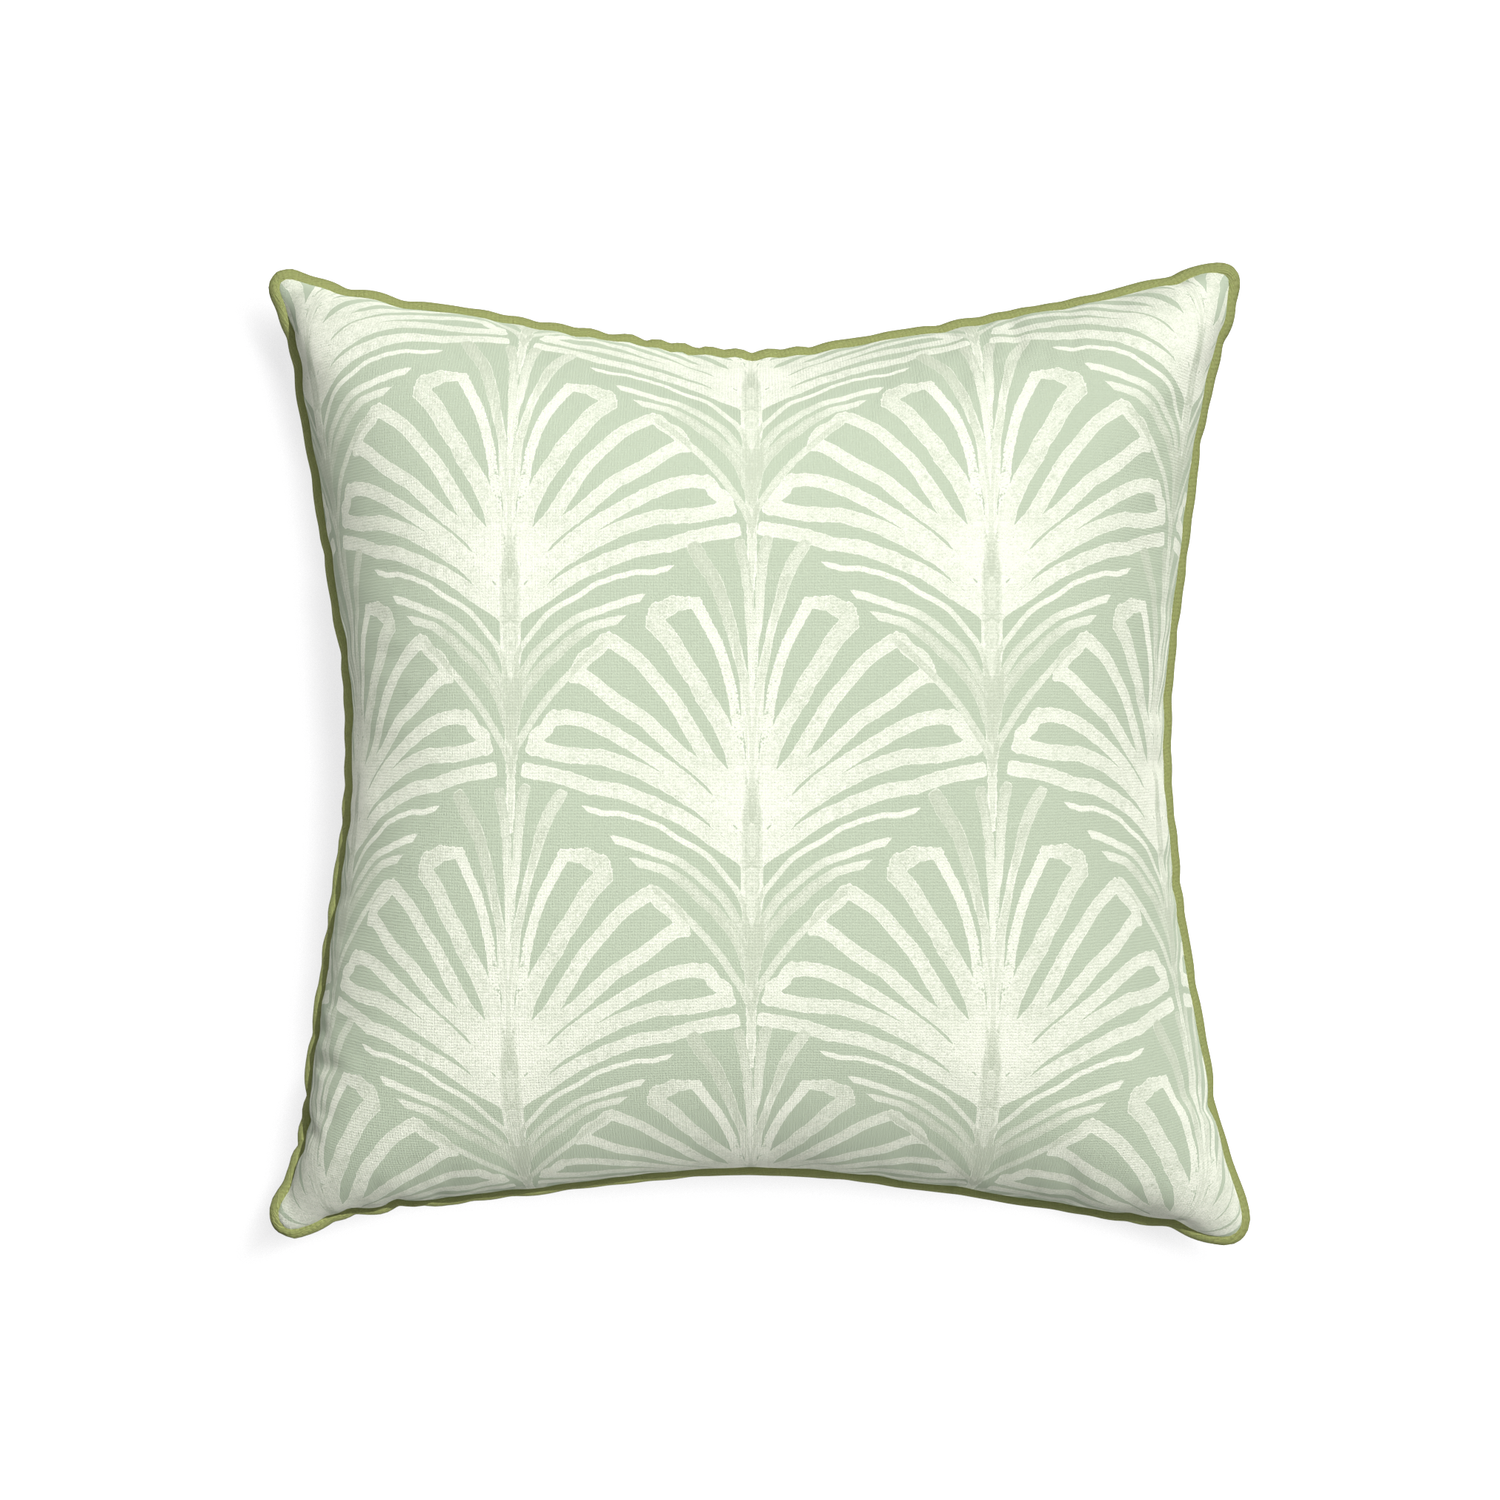 22-square suzy sage custom sage green palmpillow with moss piping on white background